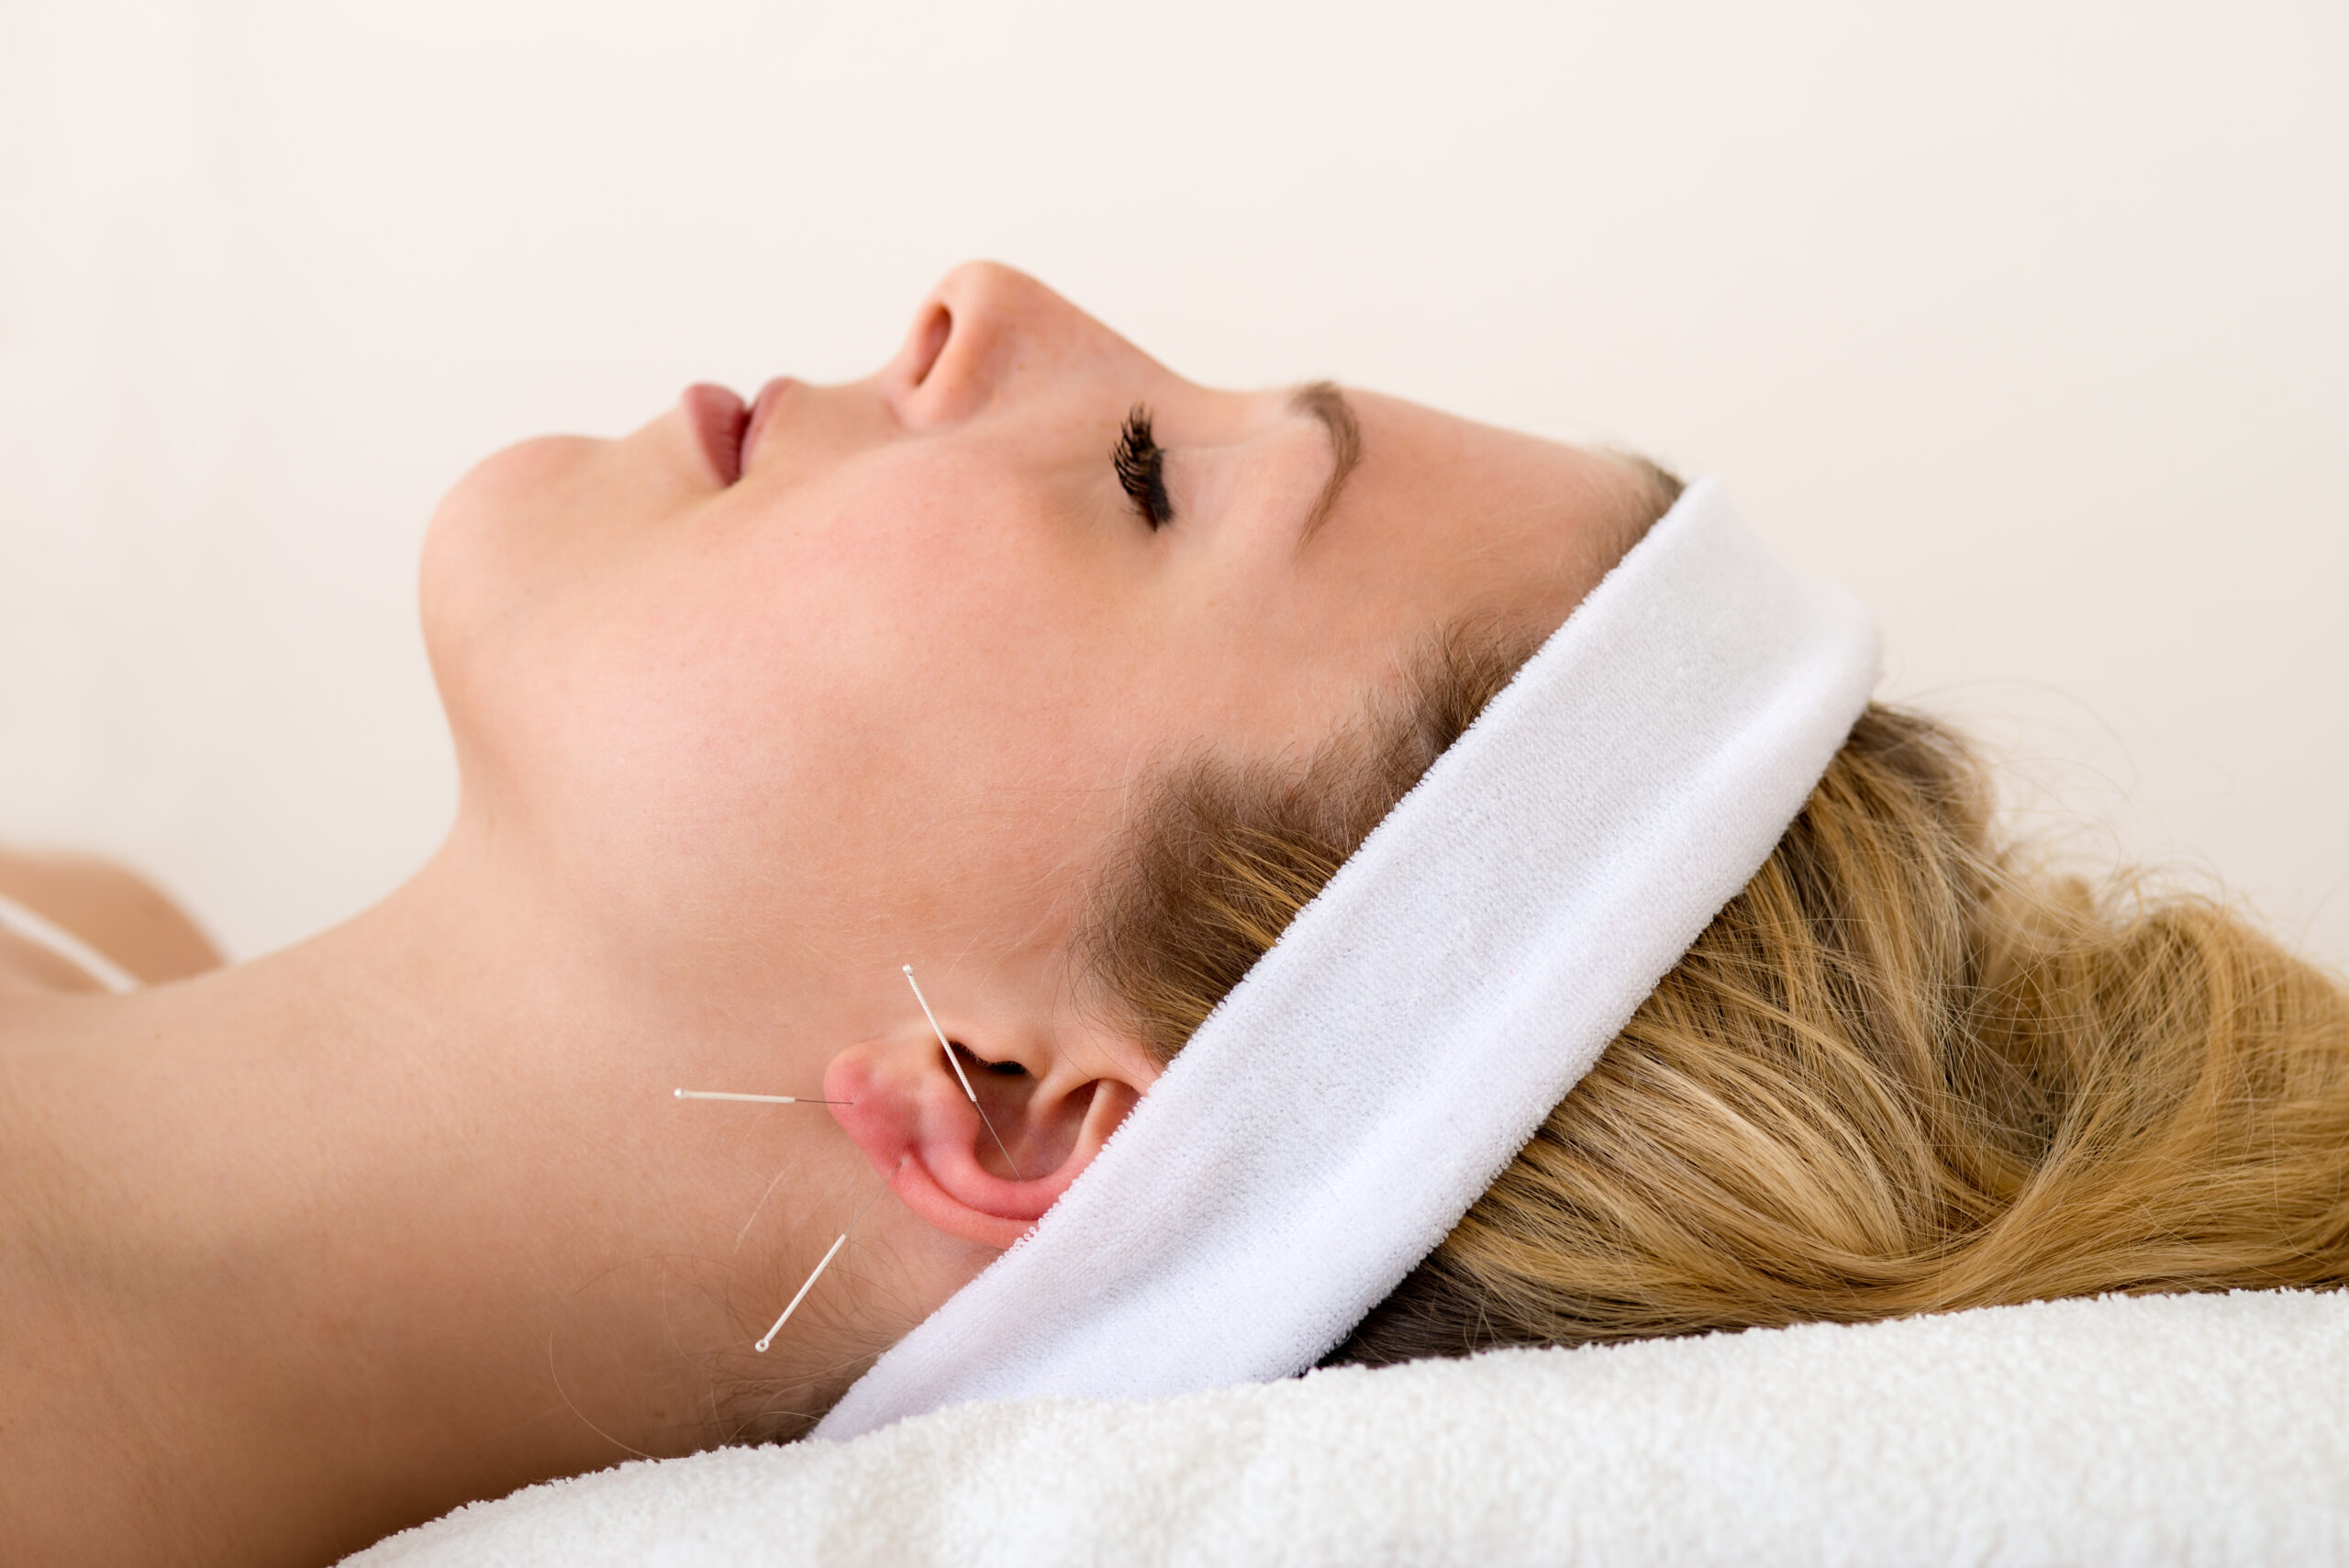 Blonde woman laying down with a acupuncture needles on her ear